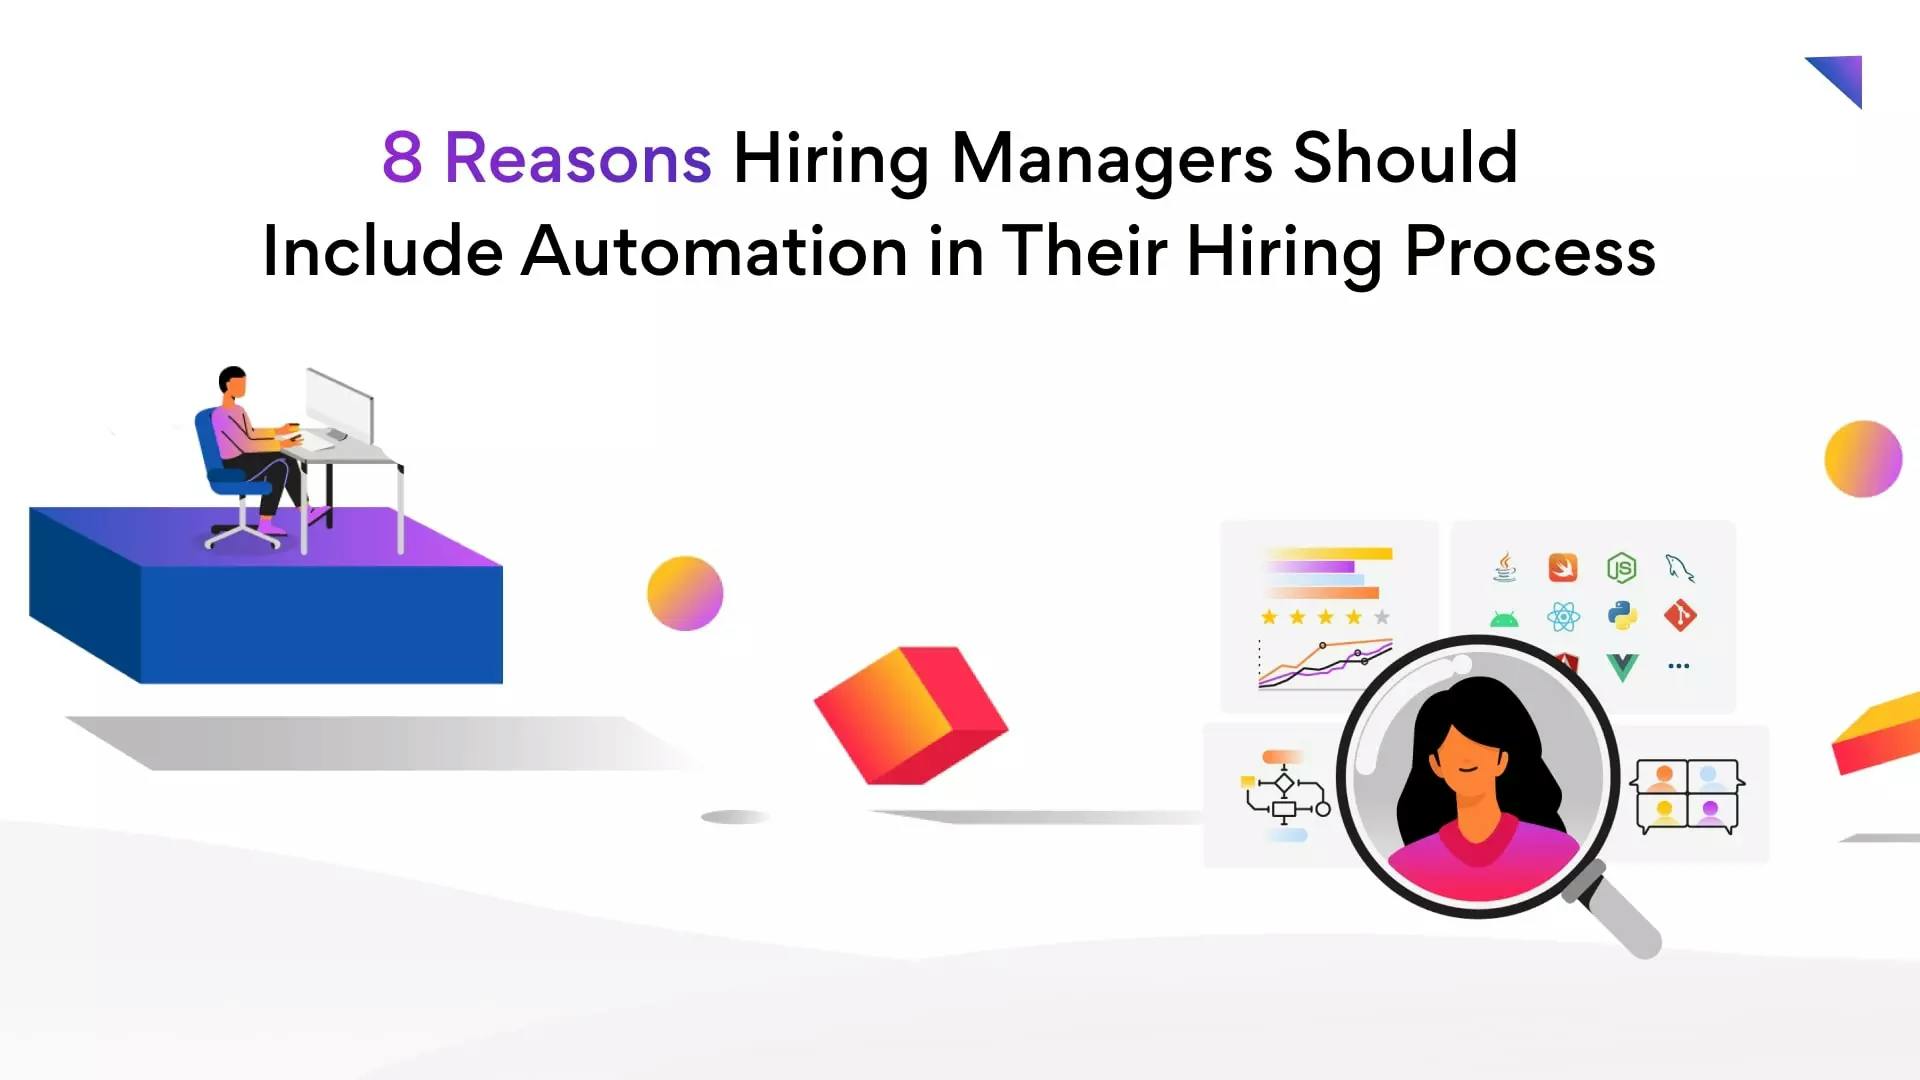 8 Ways Hiring Managers Can Include Automation in Their Hiring Process